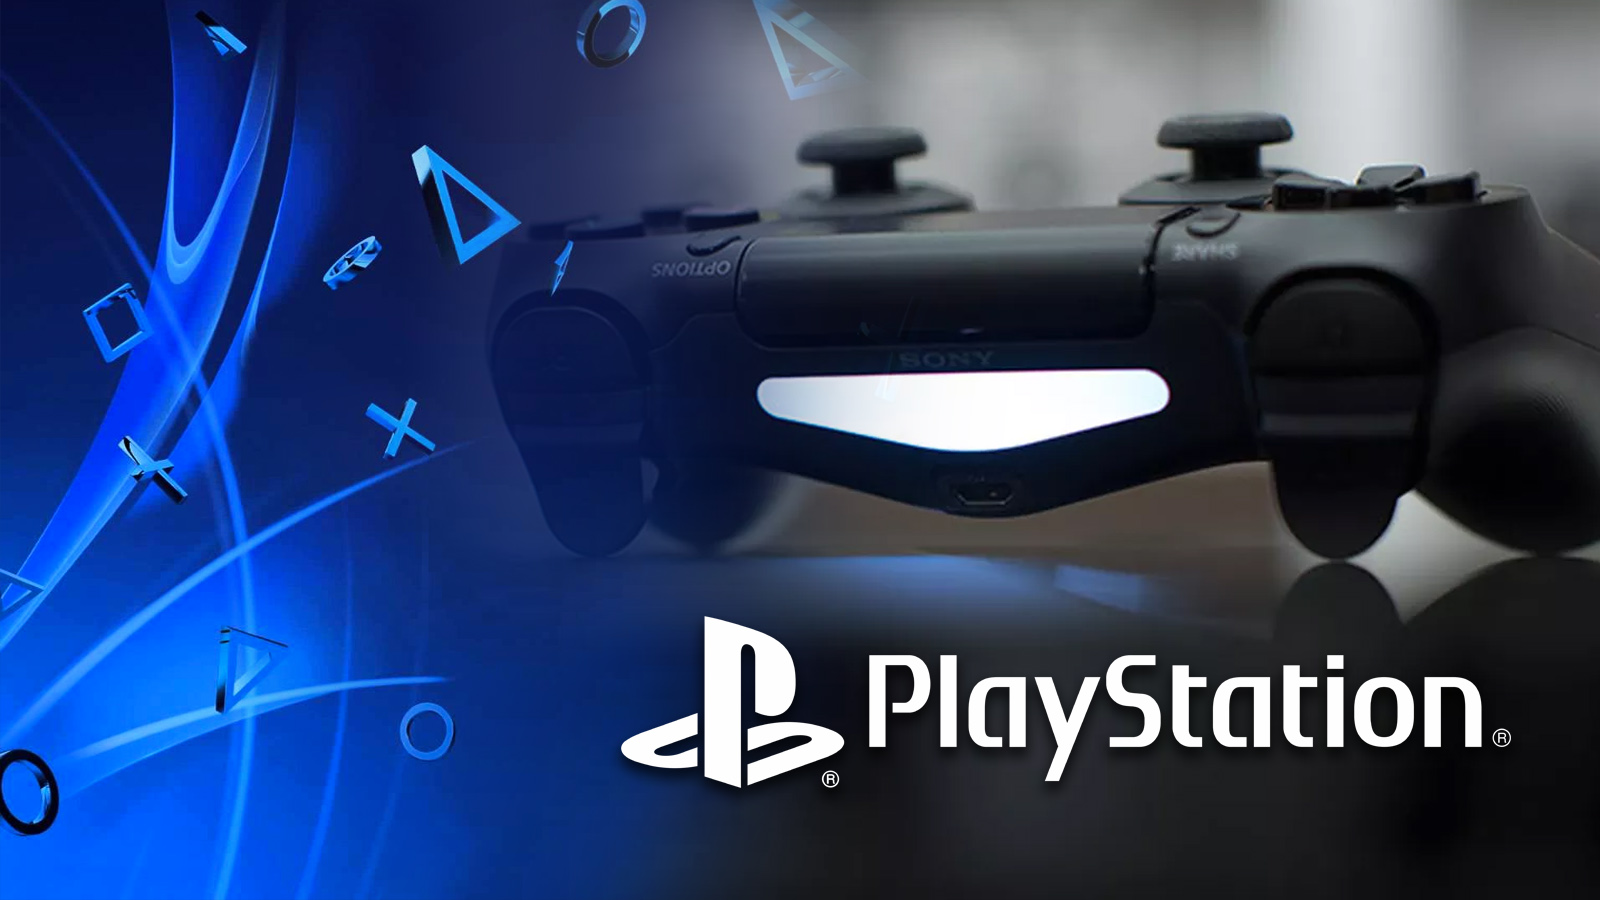 Leaked DualShock - appear to reveal PS5 controller